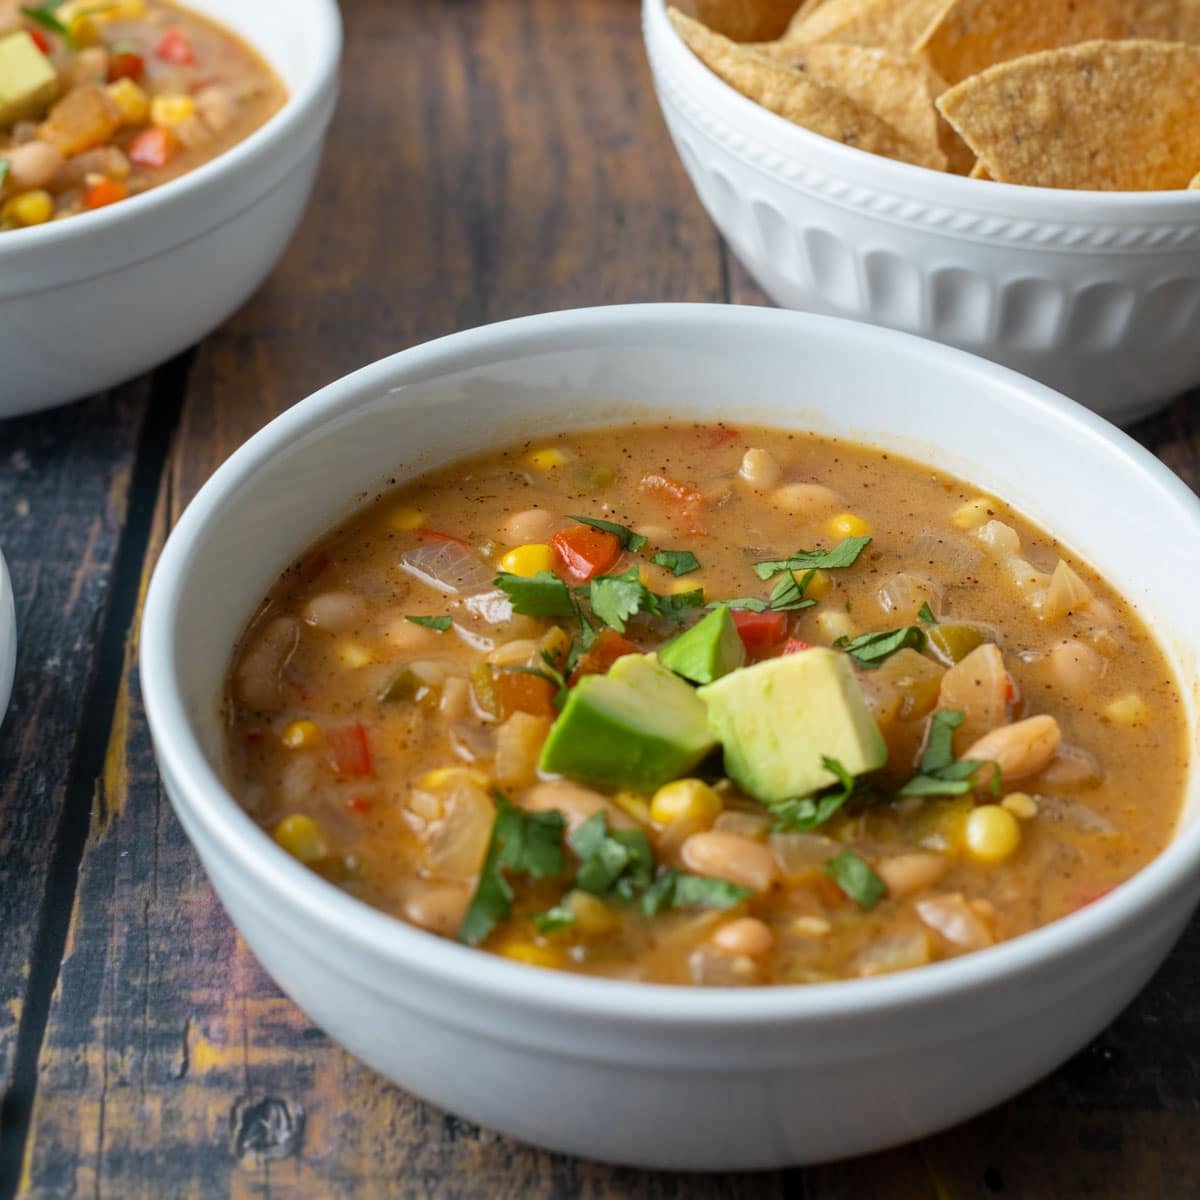 Bowl of vegan white bean chili topped with avocado and cilantro, served with a side of tortilla chips.
